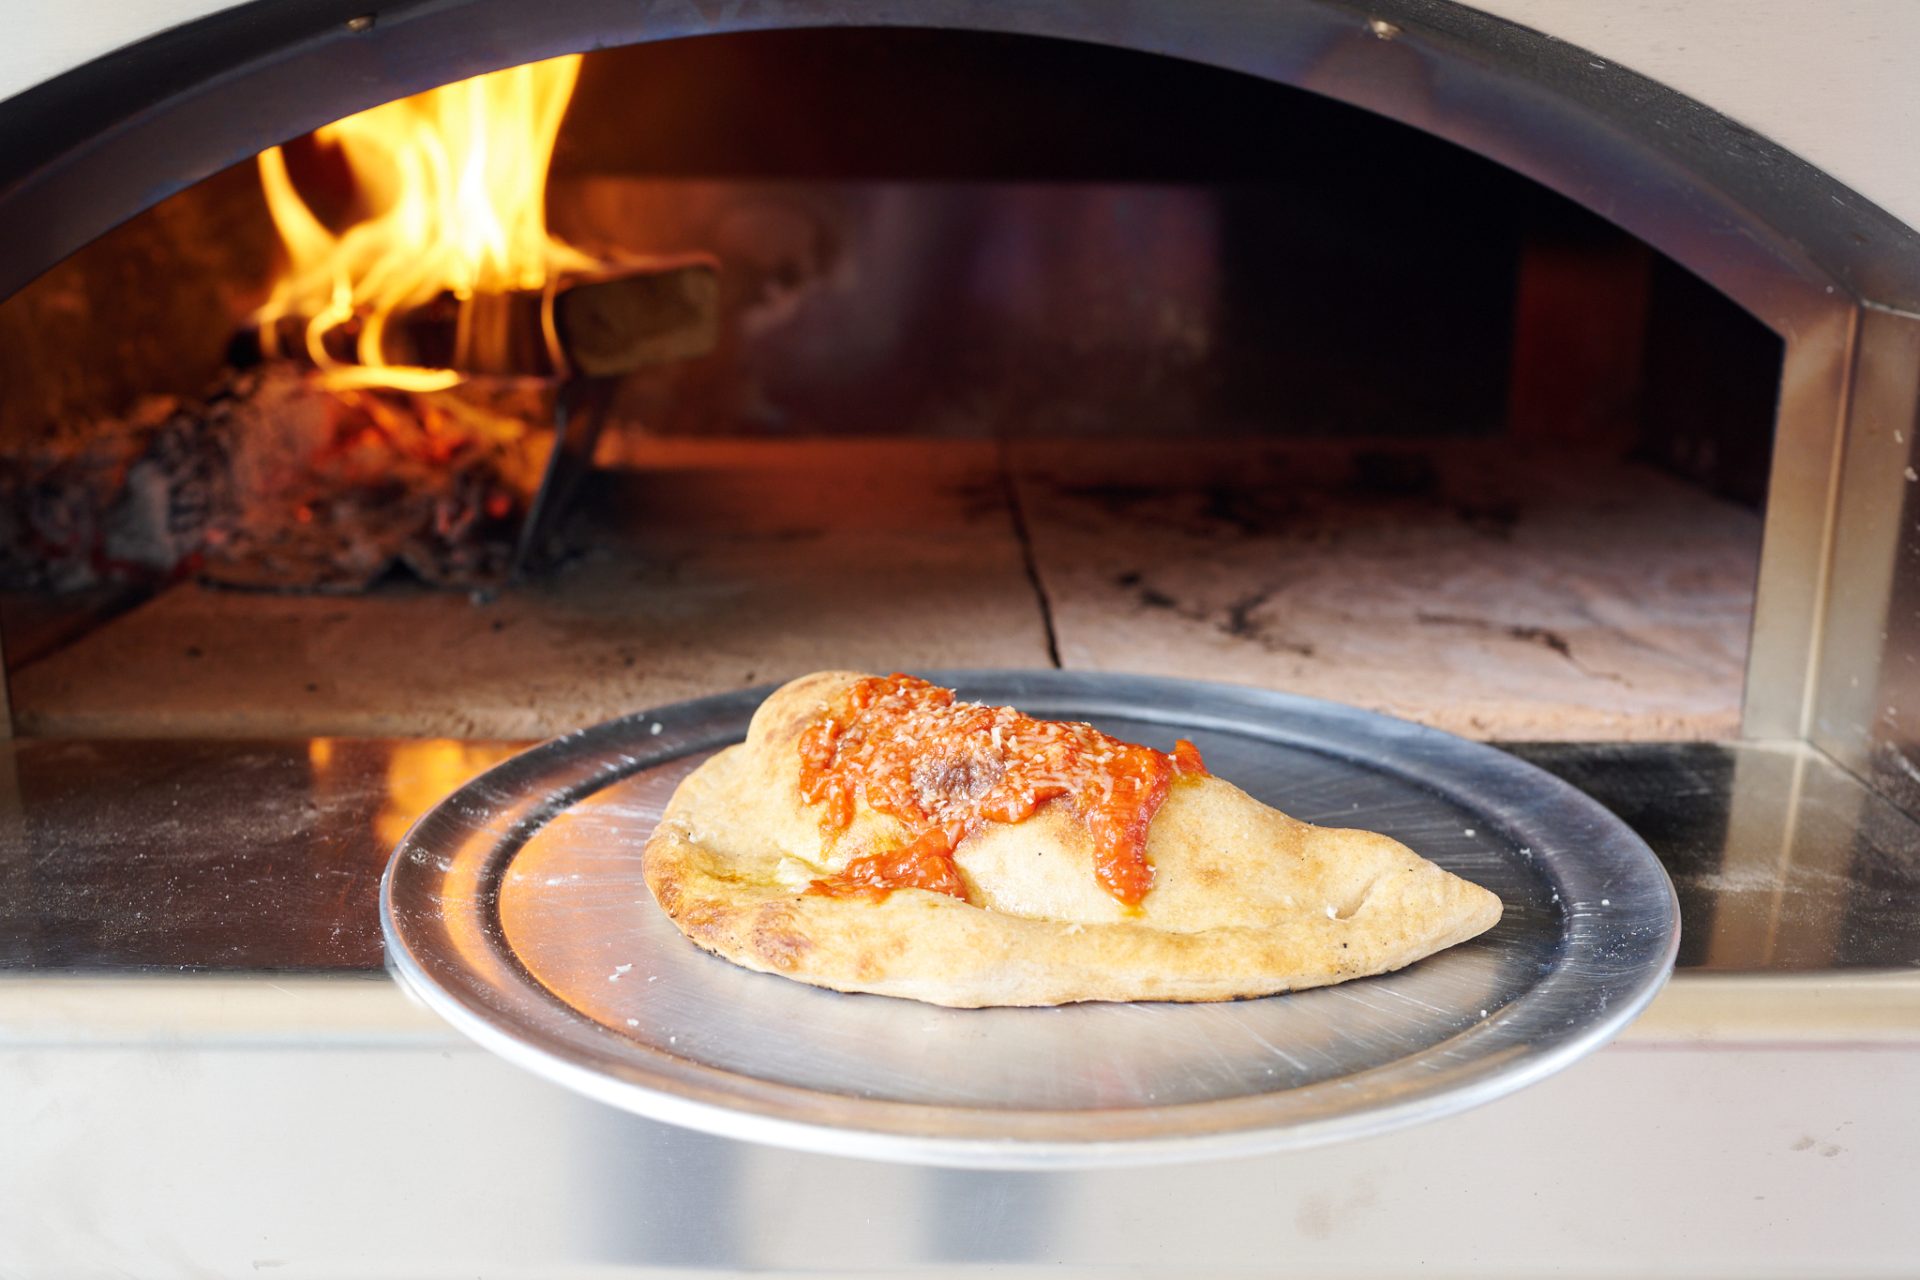 Baking a calzone in my Fontana Forni wood fired oven.